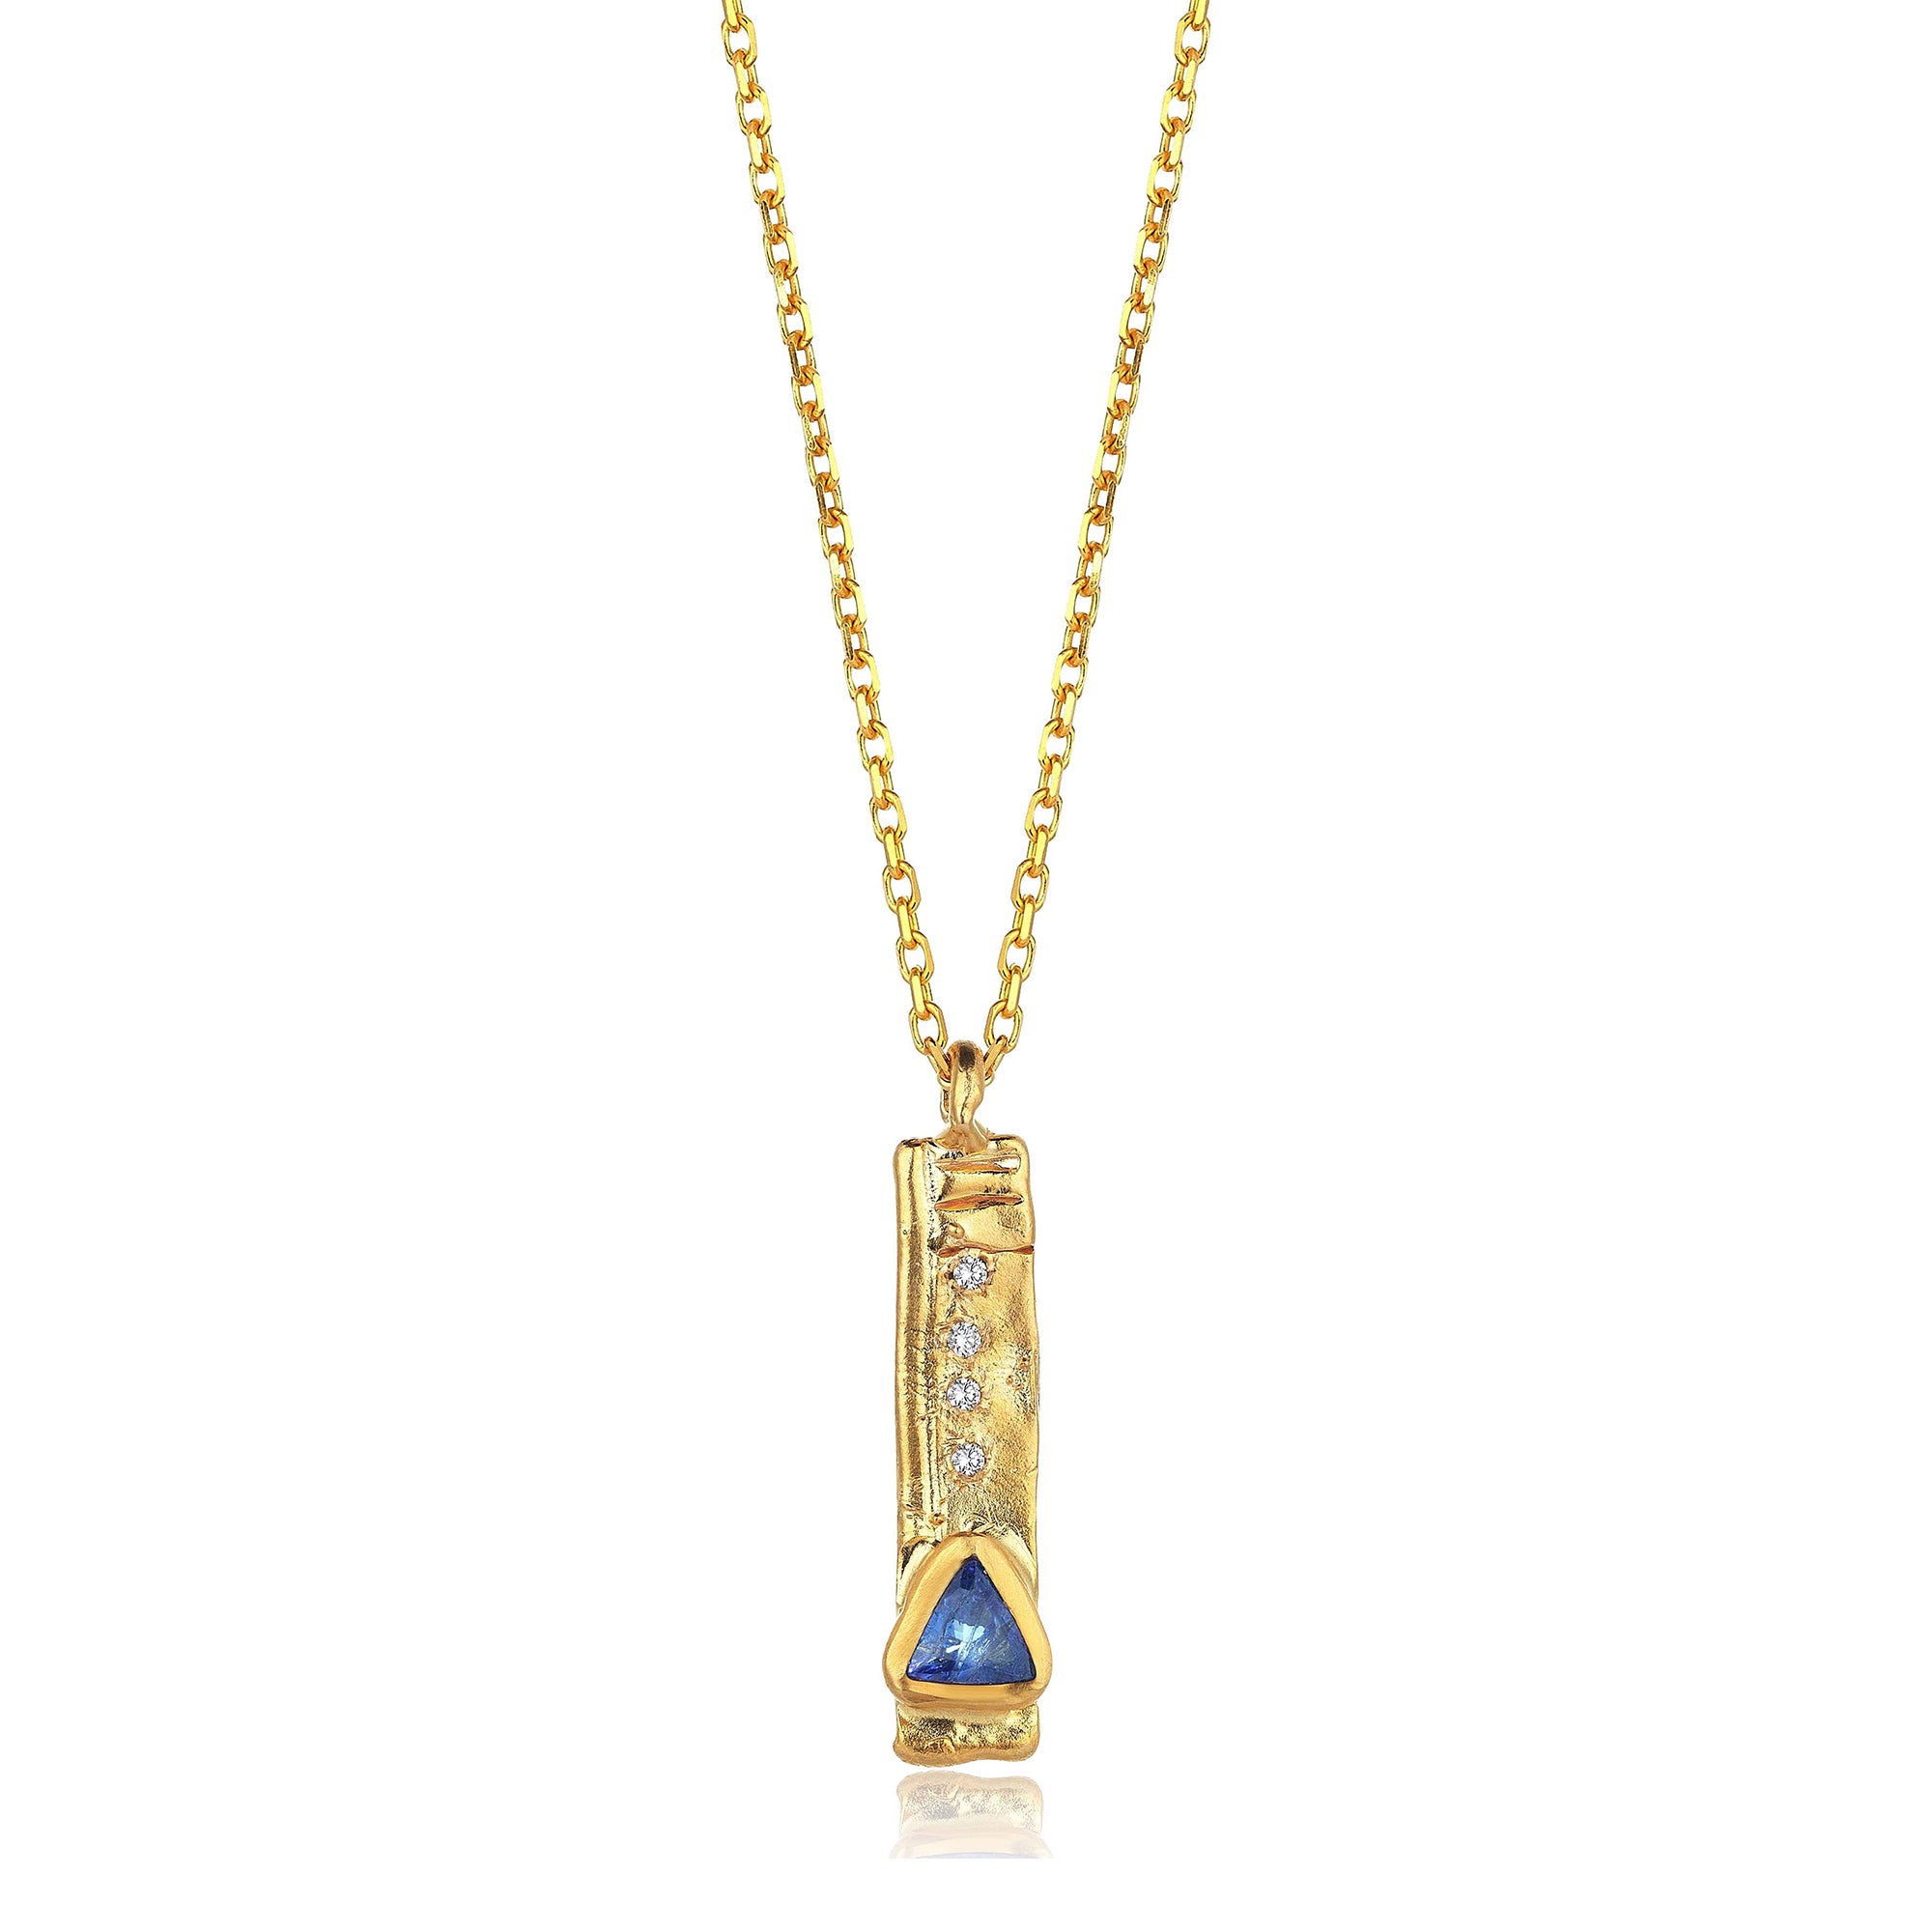 THE GIZA NECKLACE